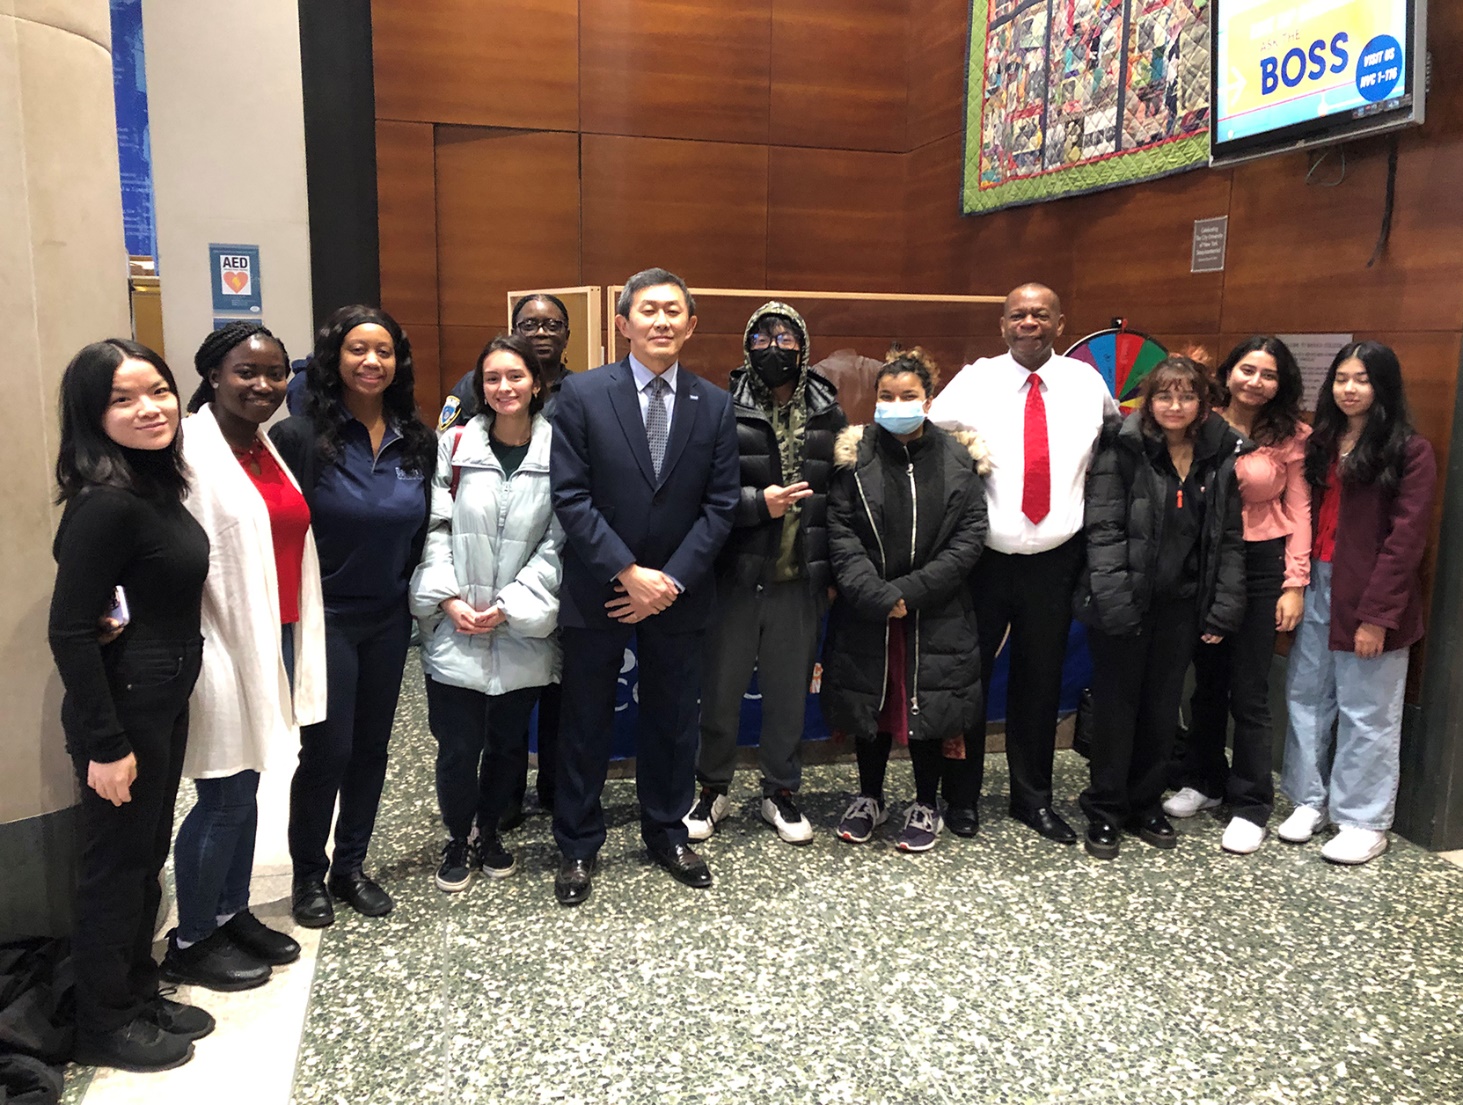 Baruch College's Public Safety Department handed out candy on Valentine's Day